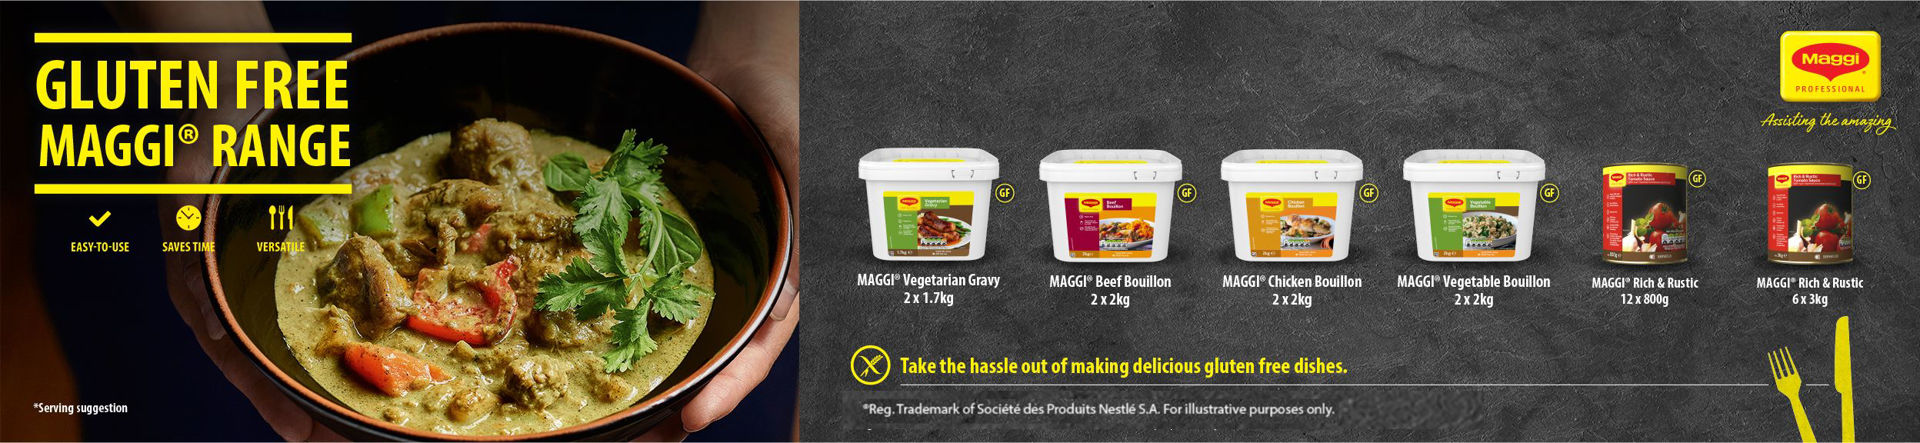 Headline Gluten Free Maggi Range. Selection on Maggi gulten free products on a grey background. Image to the left of someone holding a bowl of curry in their hands.